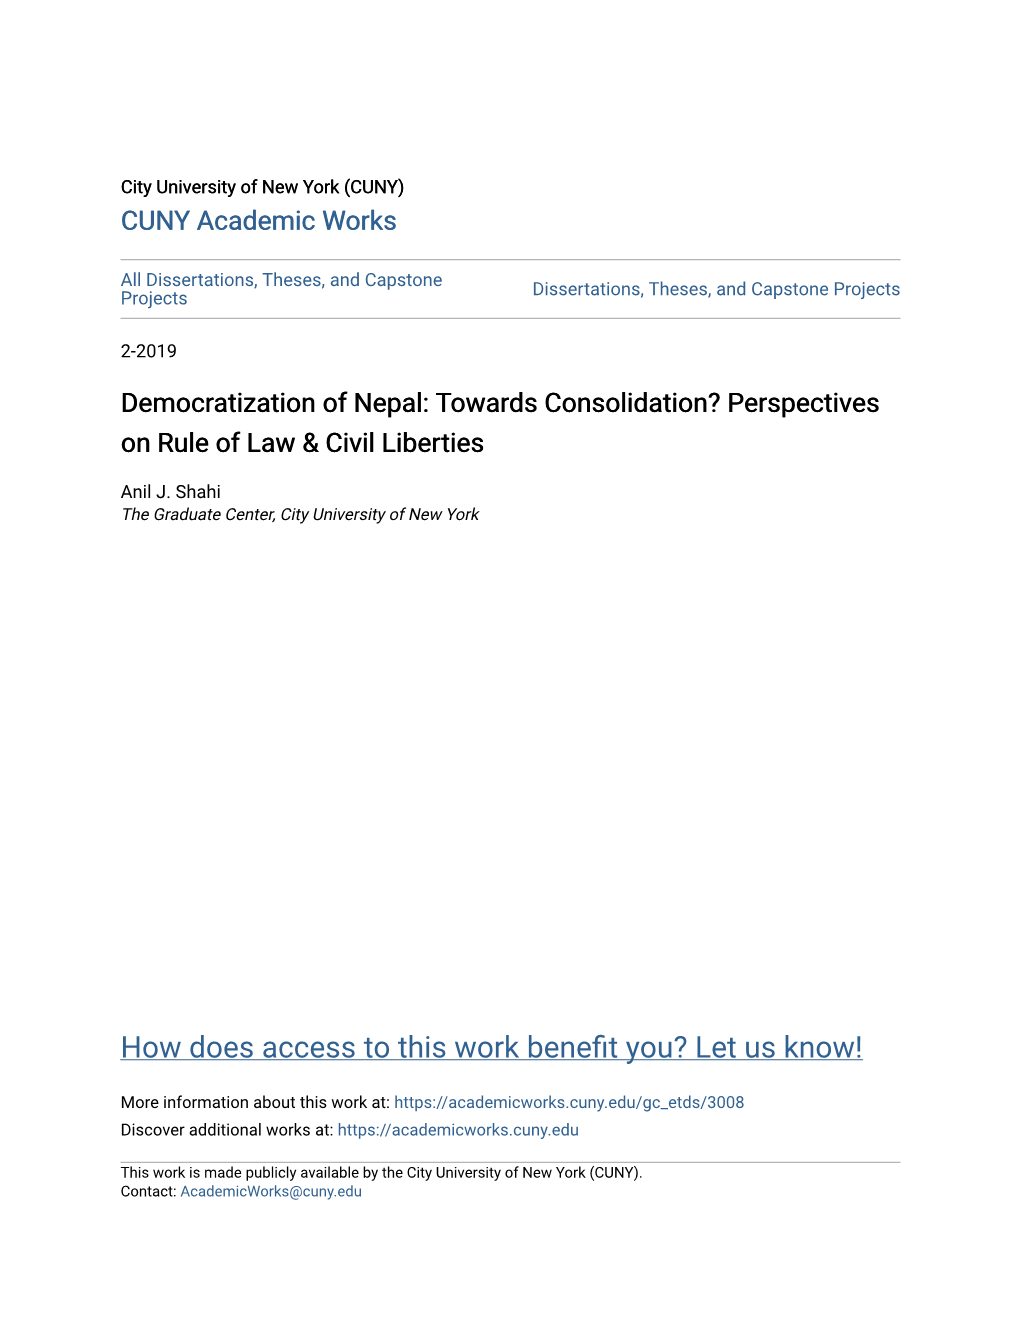 Democratization of Nepal: Towards Consolidation? Perspectives on Rule of Law & Civil Liberties